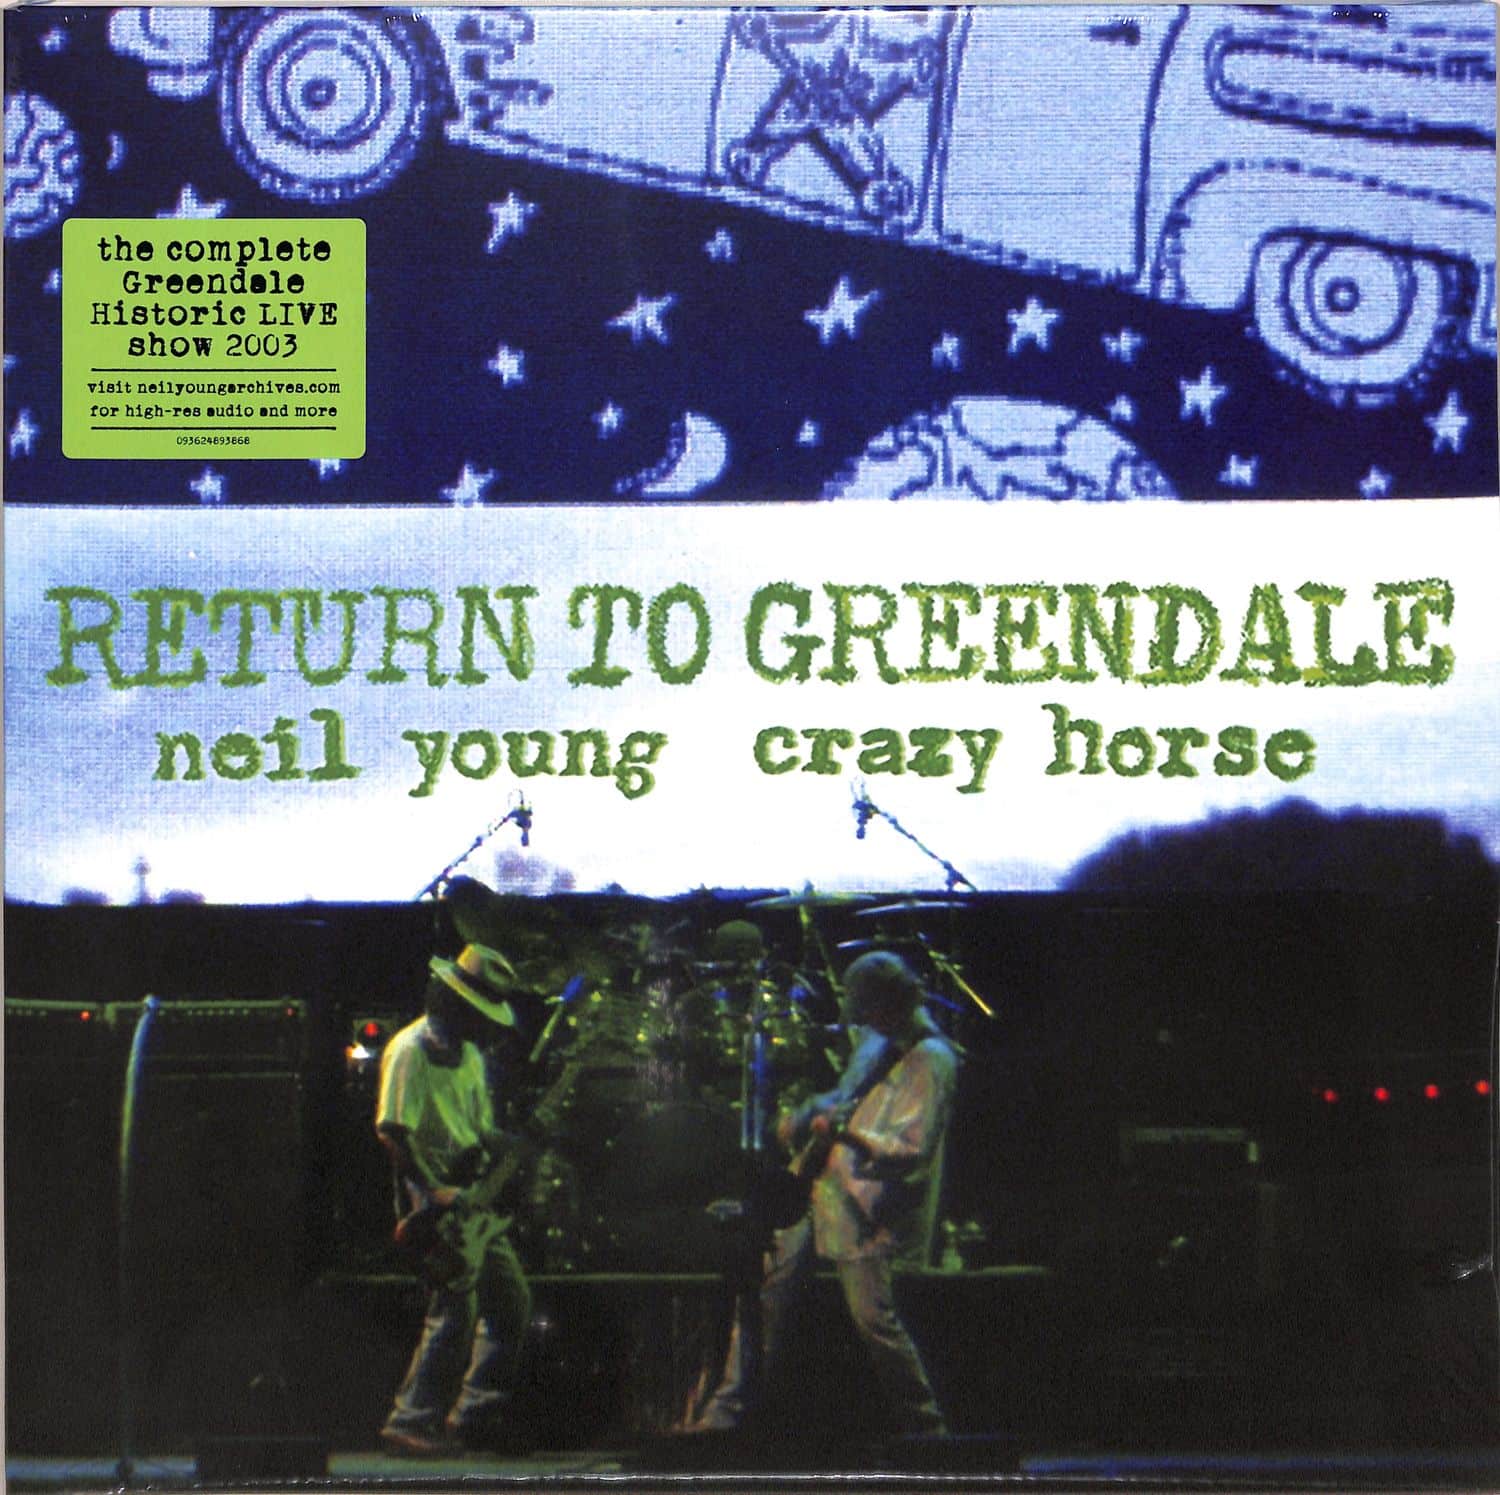 Neil Young & Crazy Horse - RETURN TO GREENDALE 